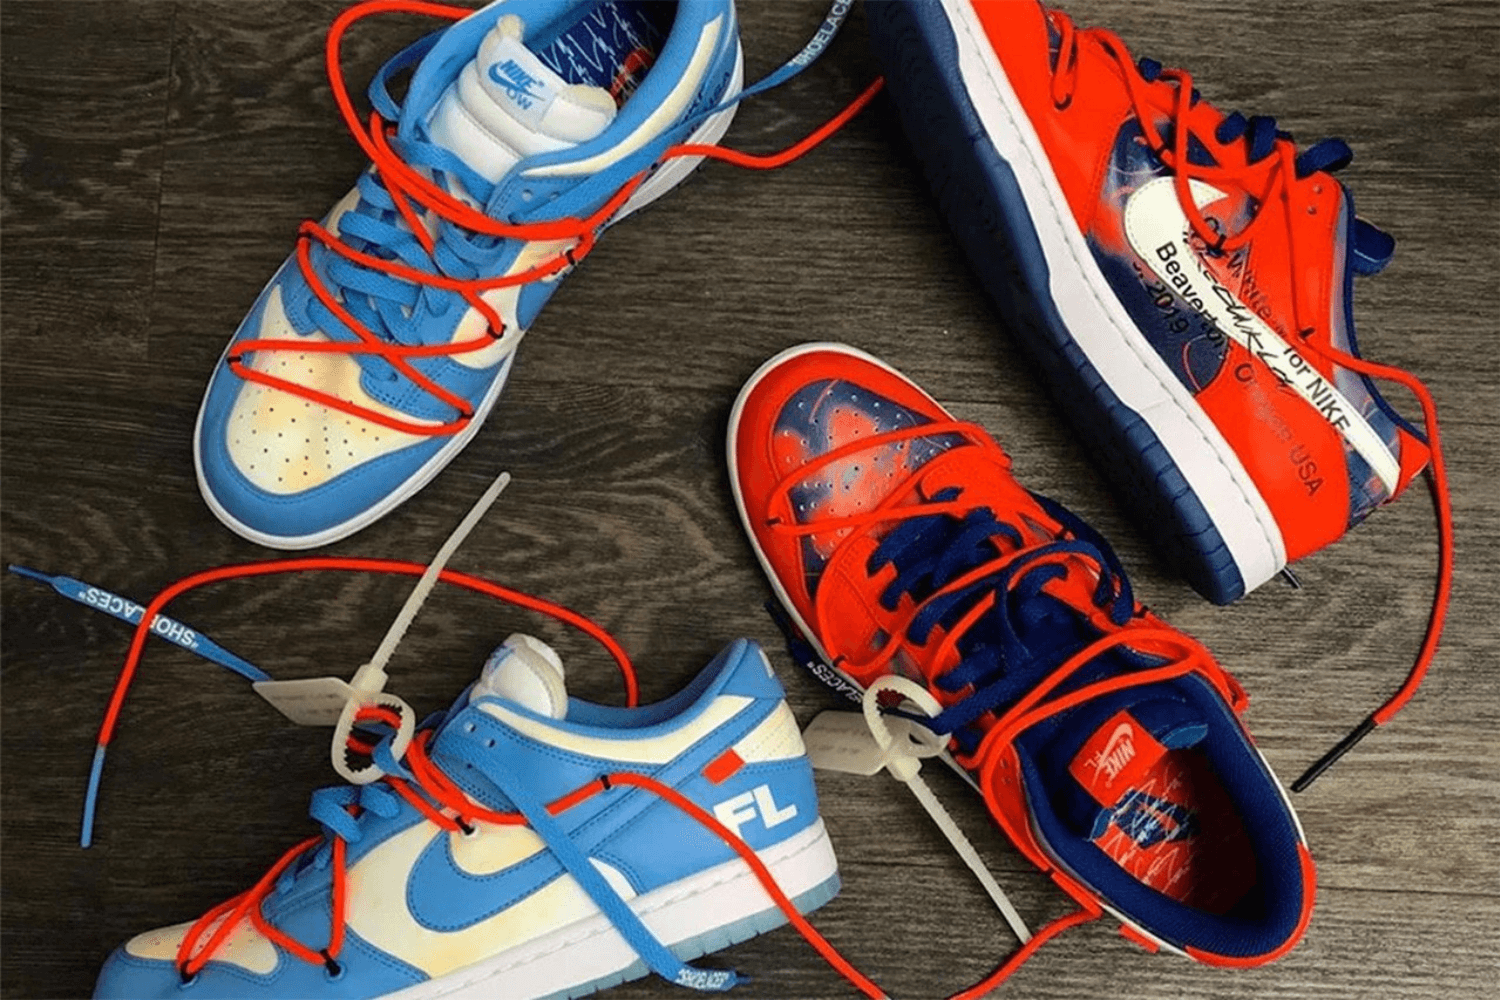 The Off-White x Futura x Nike Dunk Low pack is coming this year